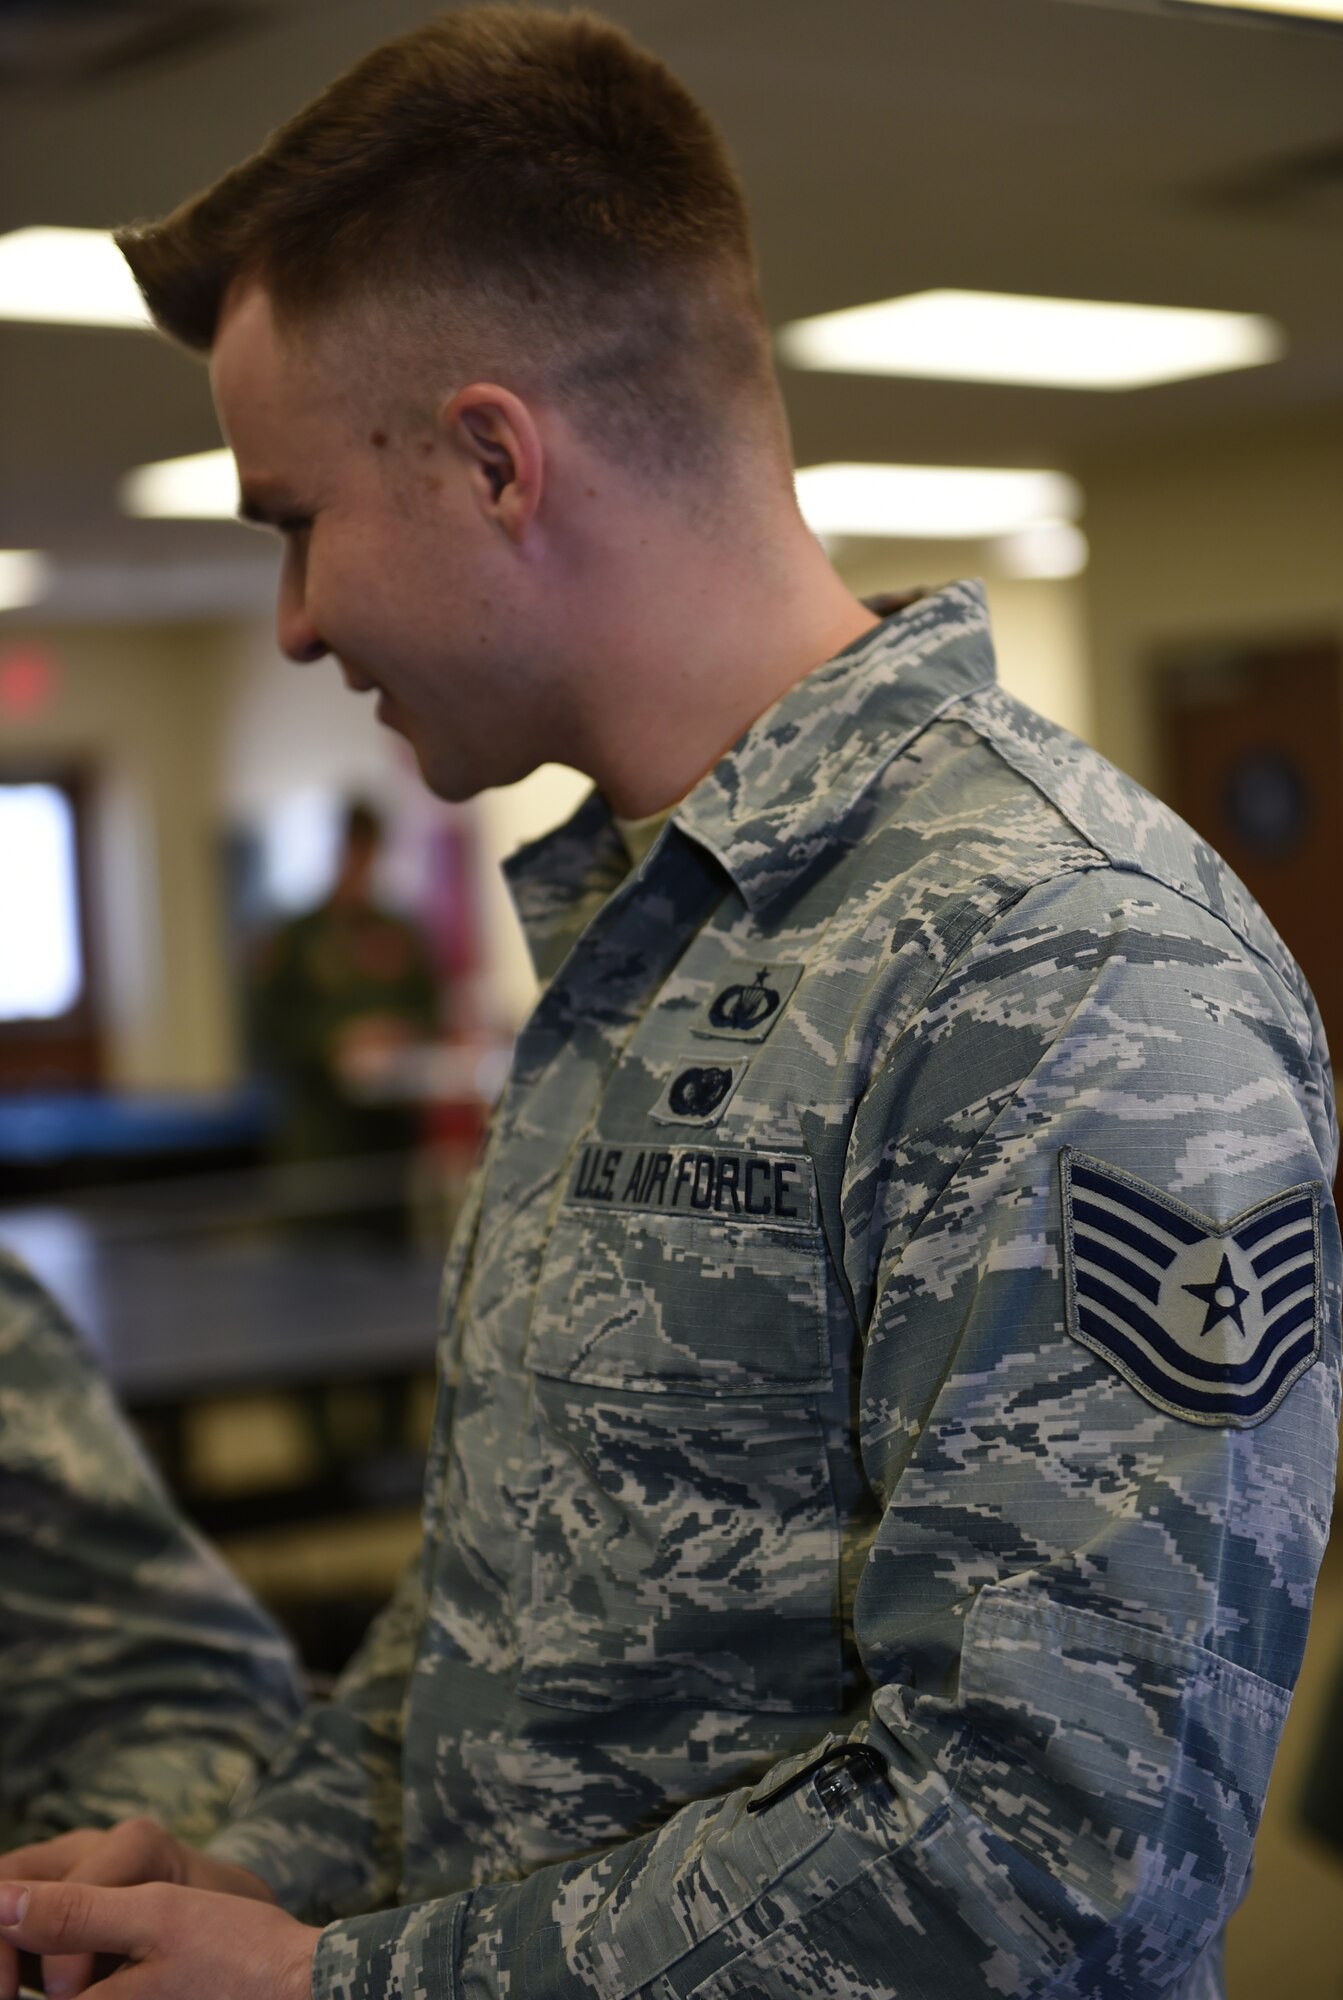 Air Force Tech. Sgt. Noah, 432nd Wing/ 432nd Air Expeditionary Wing chaplain assistant, speaks with other chapel personnel Jan. 20, 2016, at Creech Air Force Base, Nevada. Noah is the NCOIC of chapel affairs and is tasked with administrative work for the Chaplain Corps. Chaplain assistants help to provide spiritual care and opportunity for Airmen, their families, and other authorized personnel to exercise their constitutional right to the free exercise of religion. (U.S. Air Force photo by Airman 1st Class Kristan Campbell/Released)